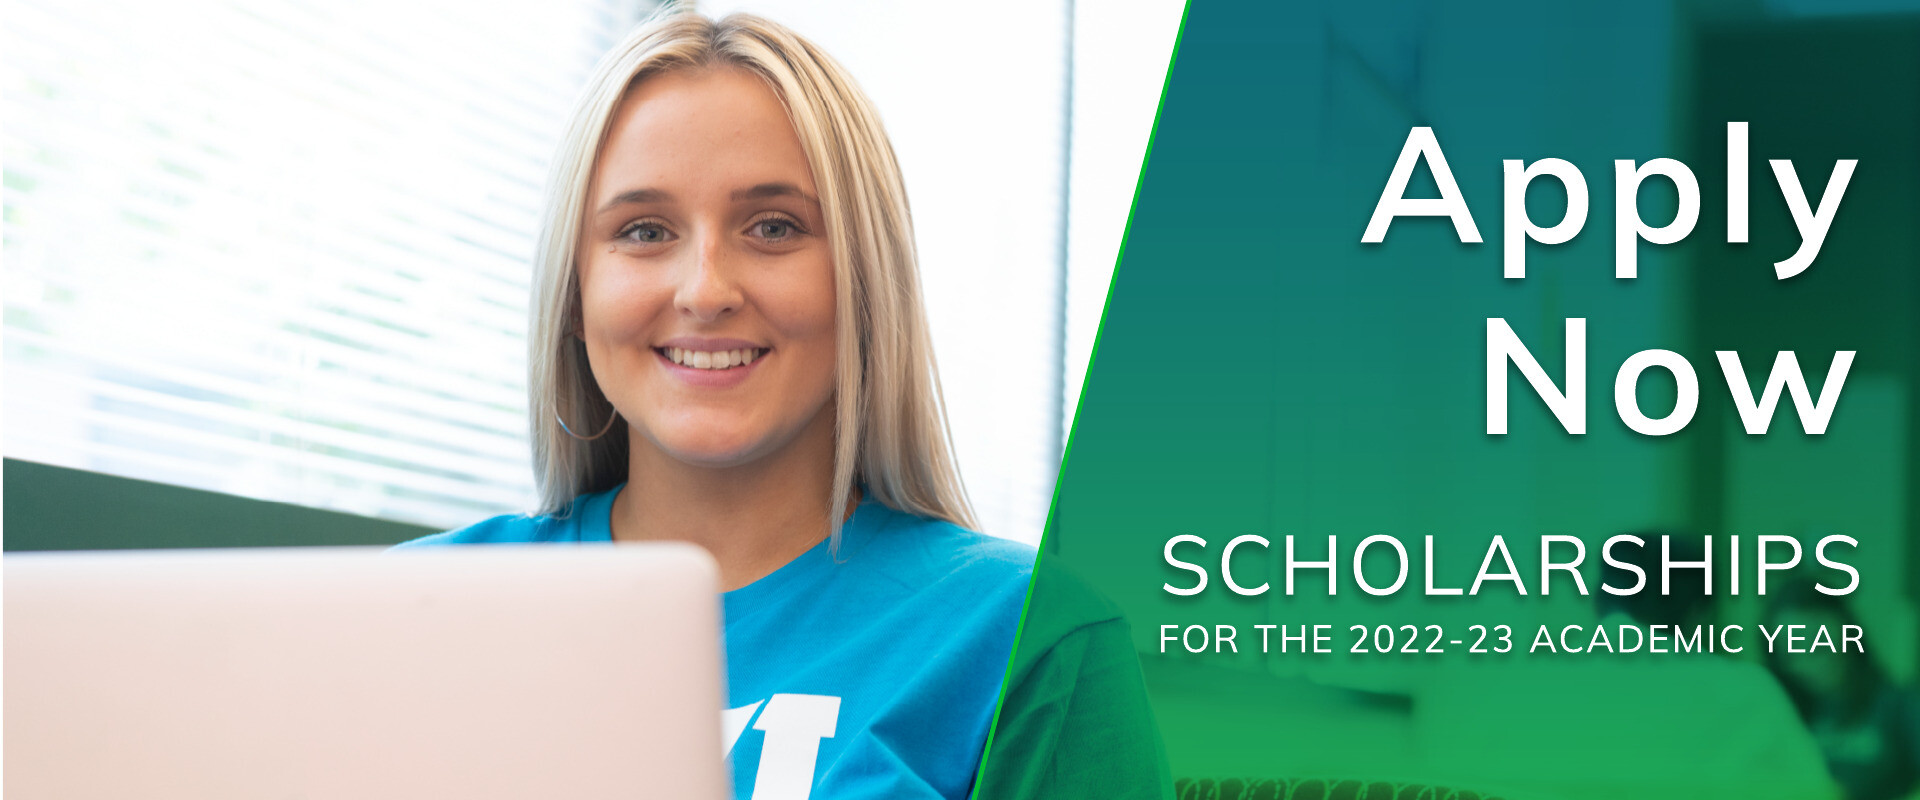 Apply Now, Scholarships for the 2022-23 academic year